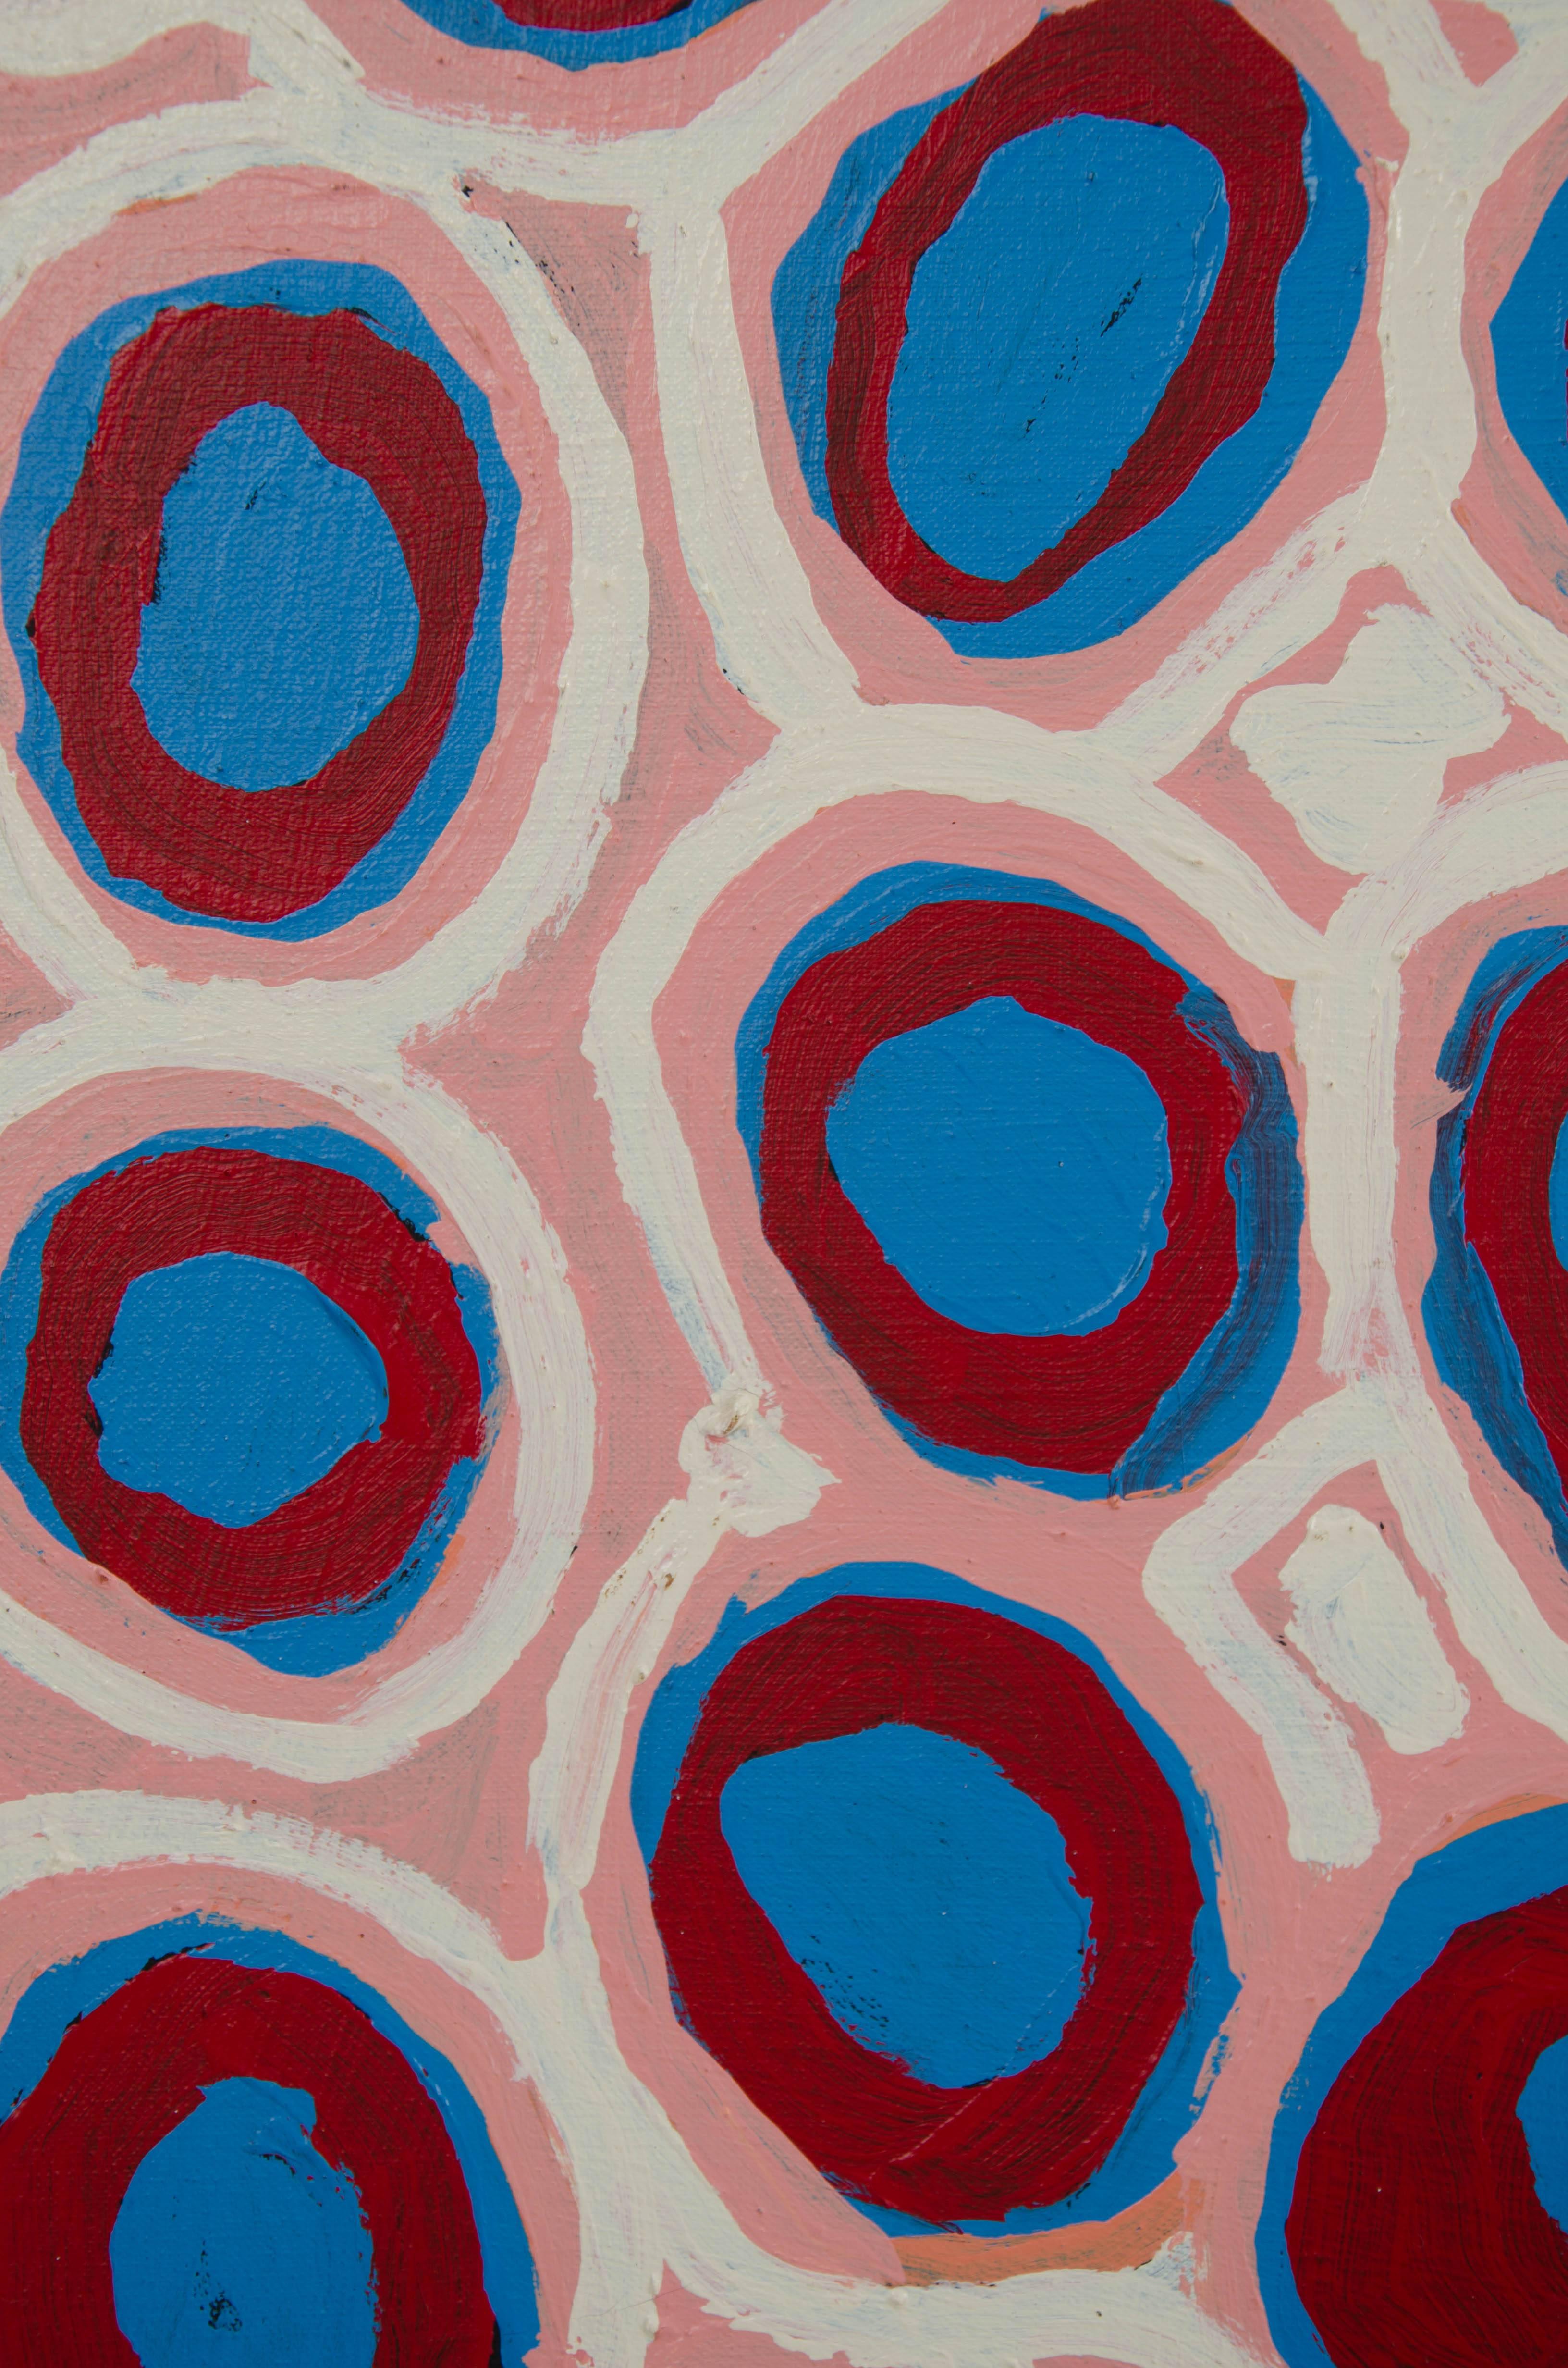 Painted Australian Aboriginal Painting with Pink, Red and Blue by Alice Nampitjinpa For Sale